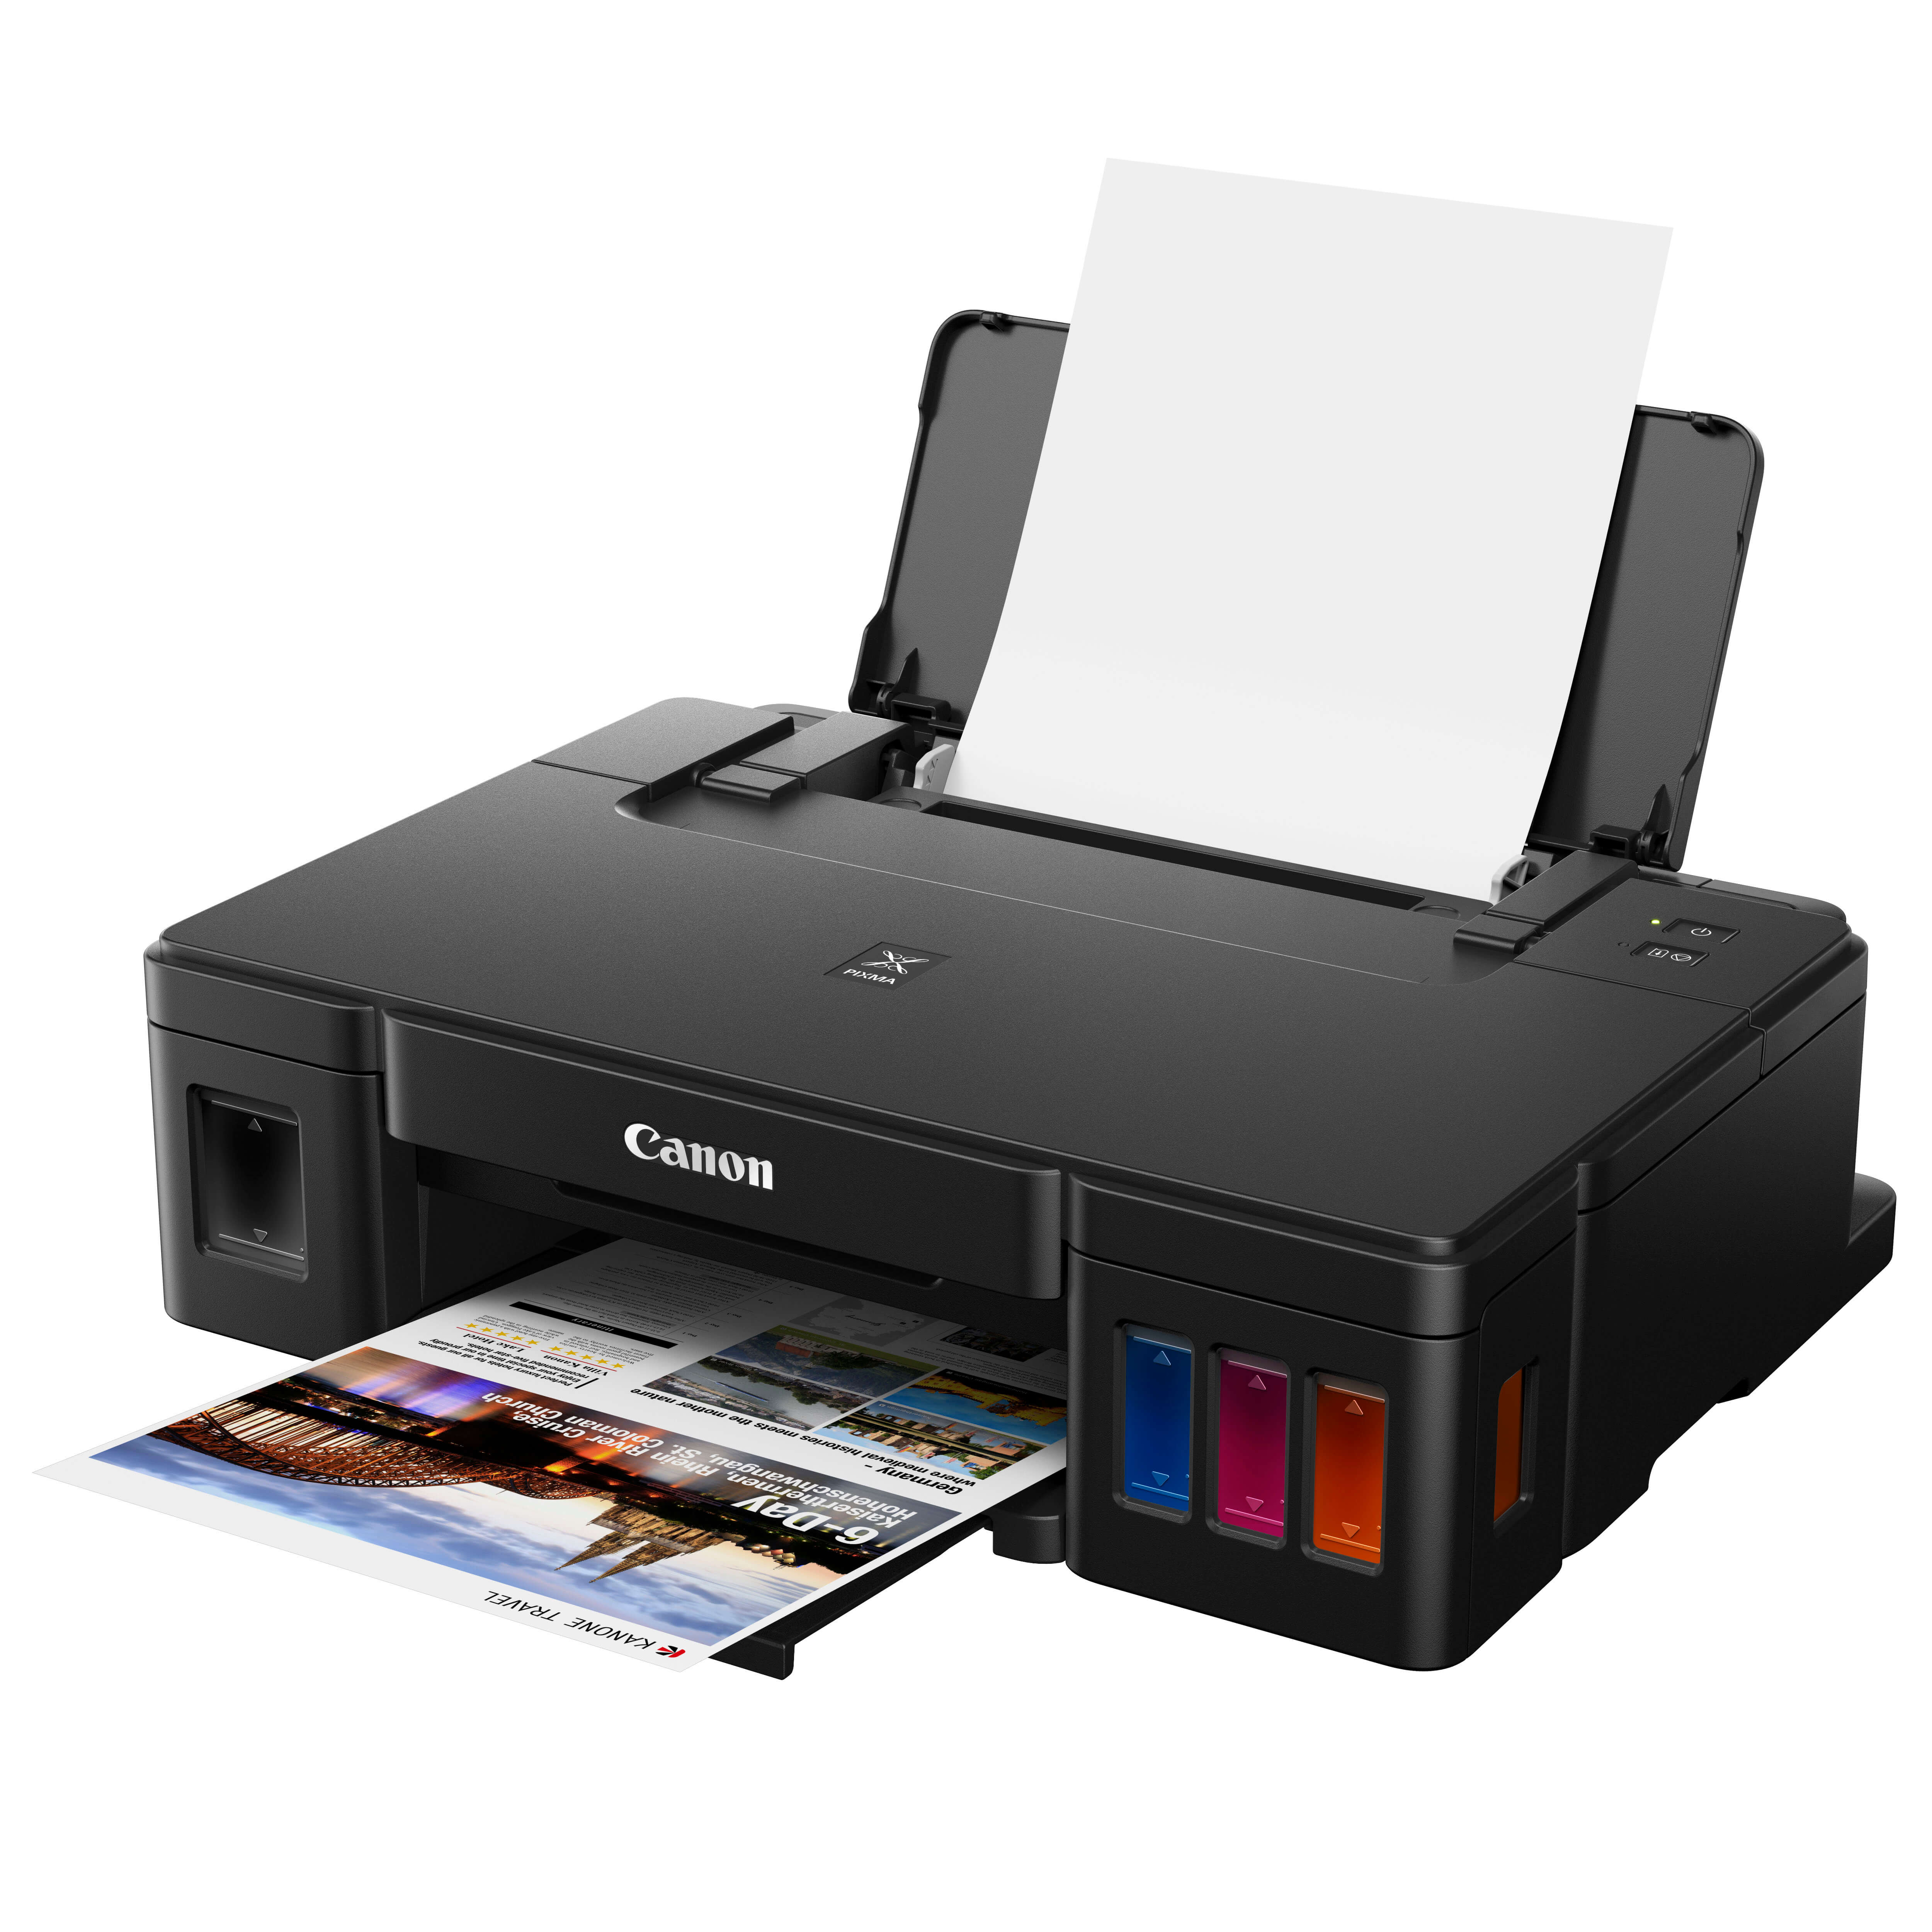 Canon's New G Series PIXMA Printers Turns Ideas Into Opportunities